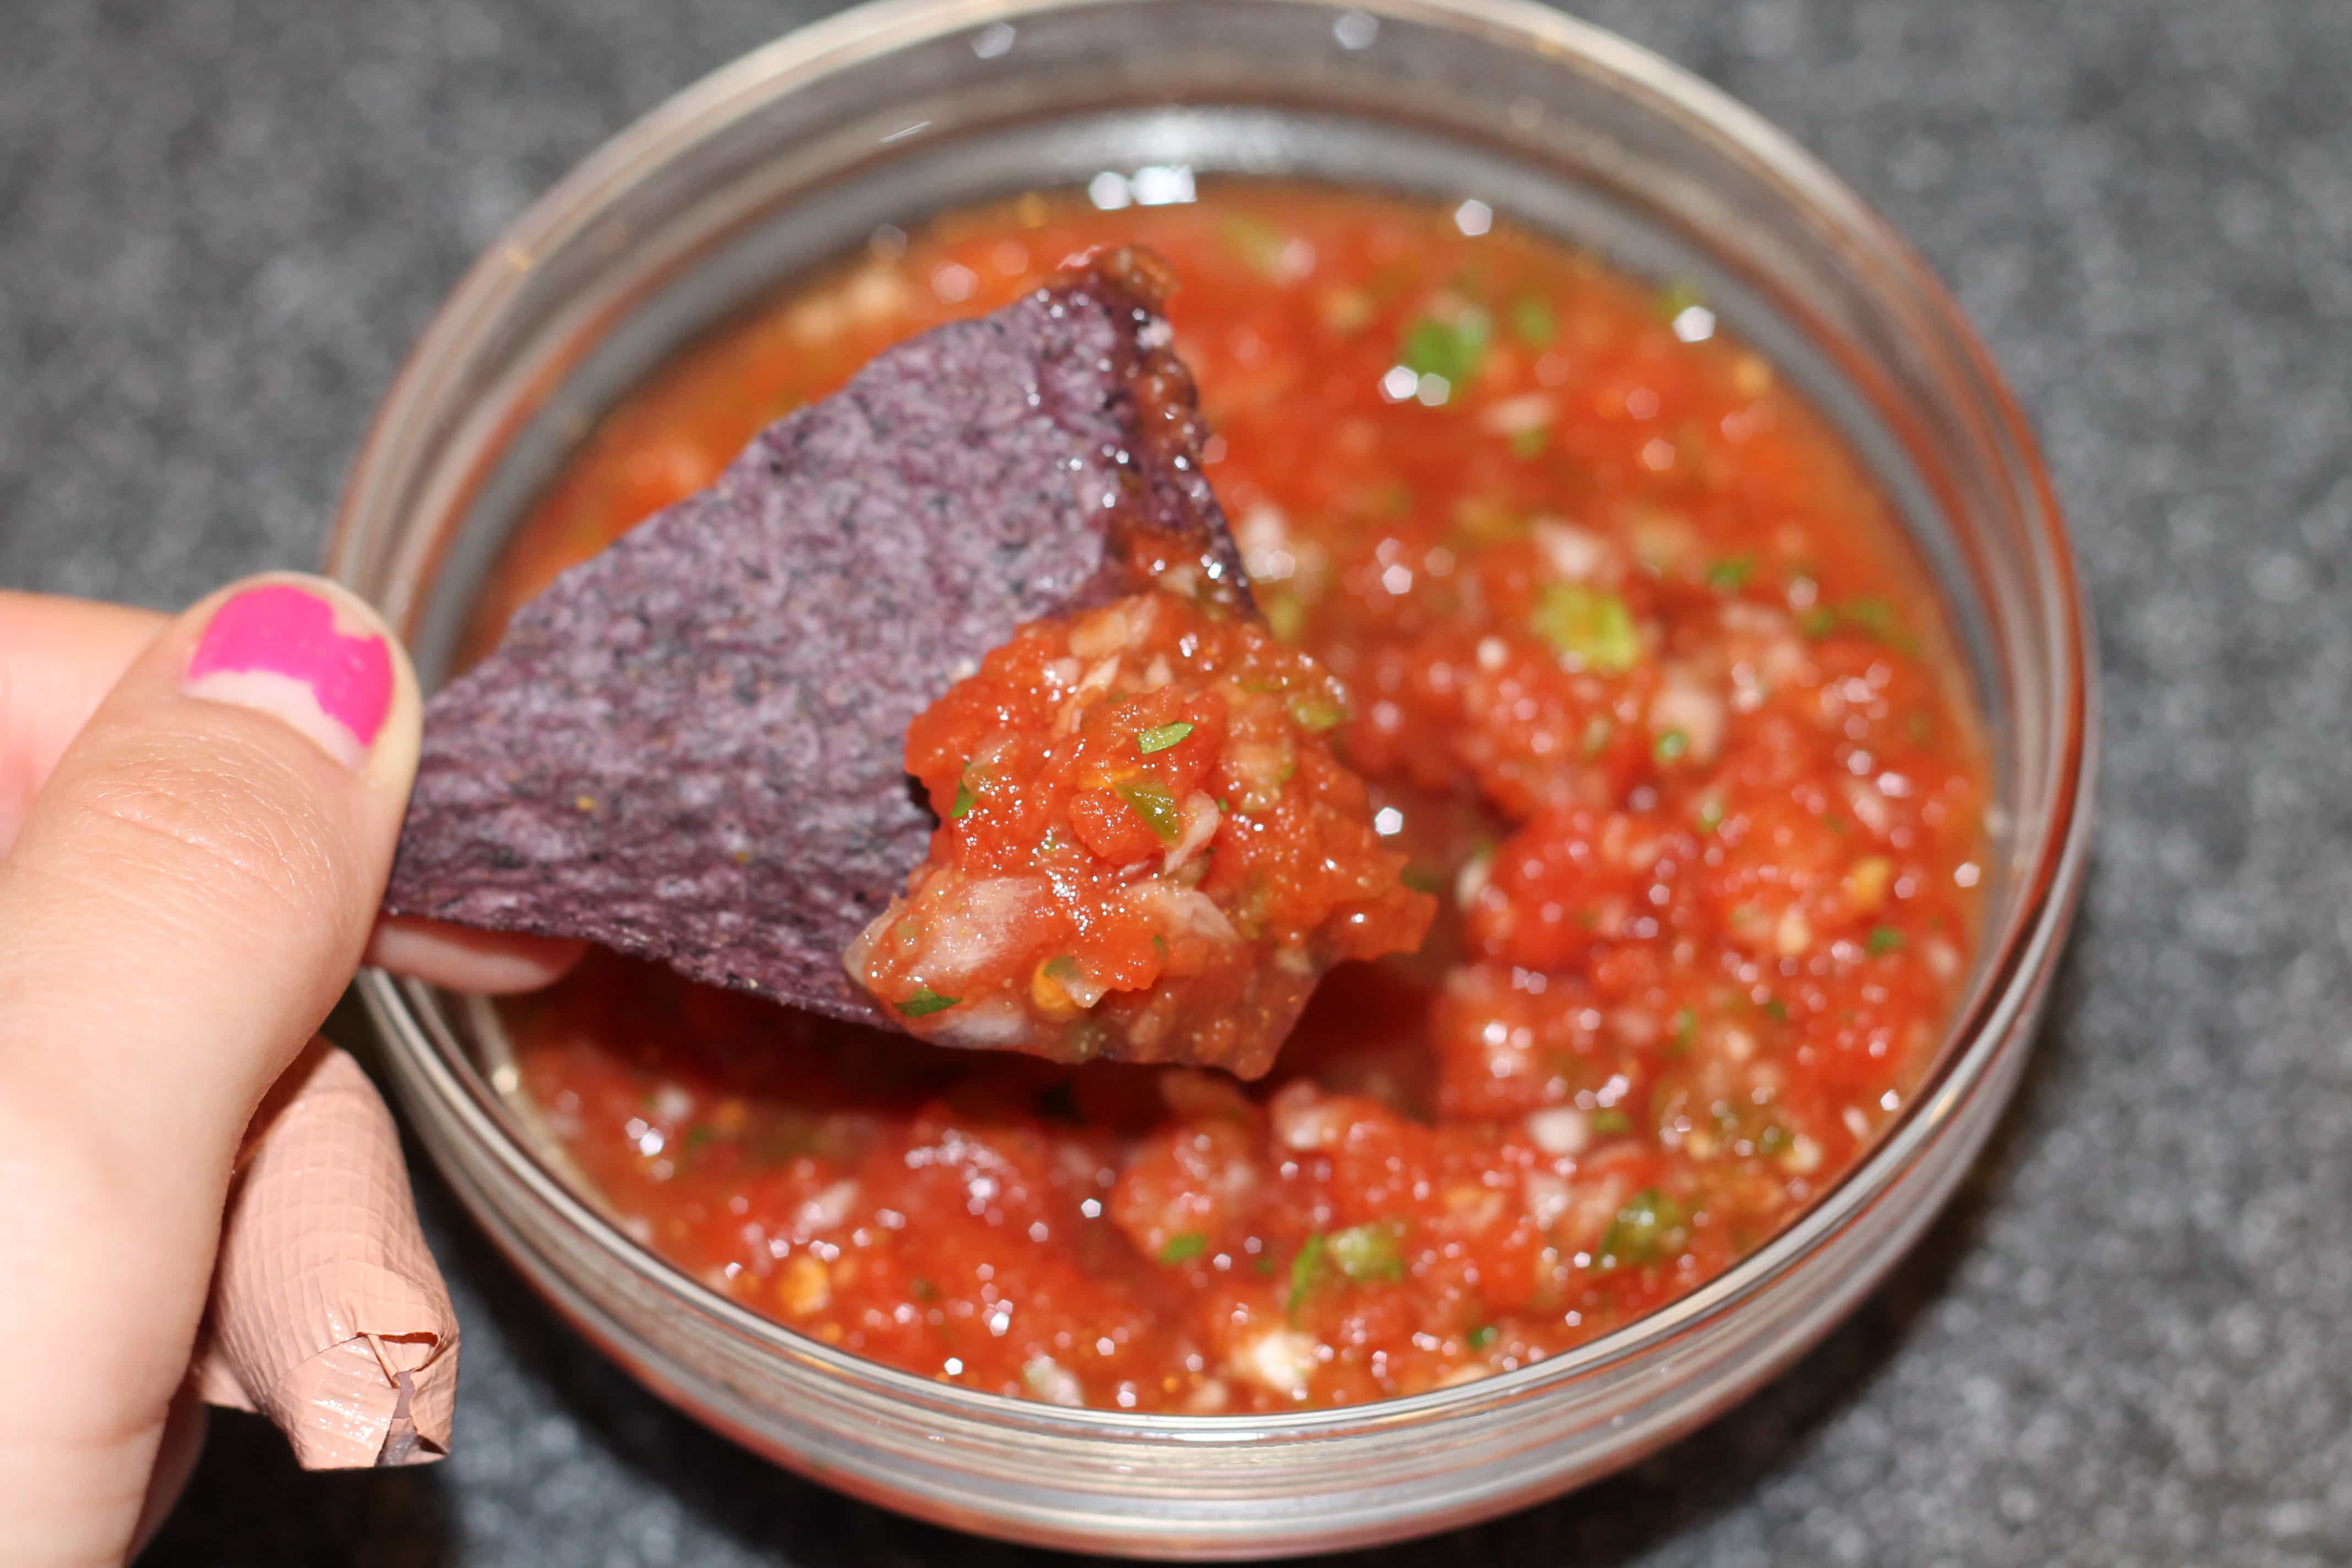 What ingredients are needed to make Mexican salsa?